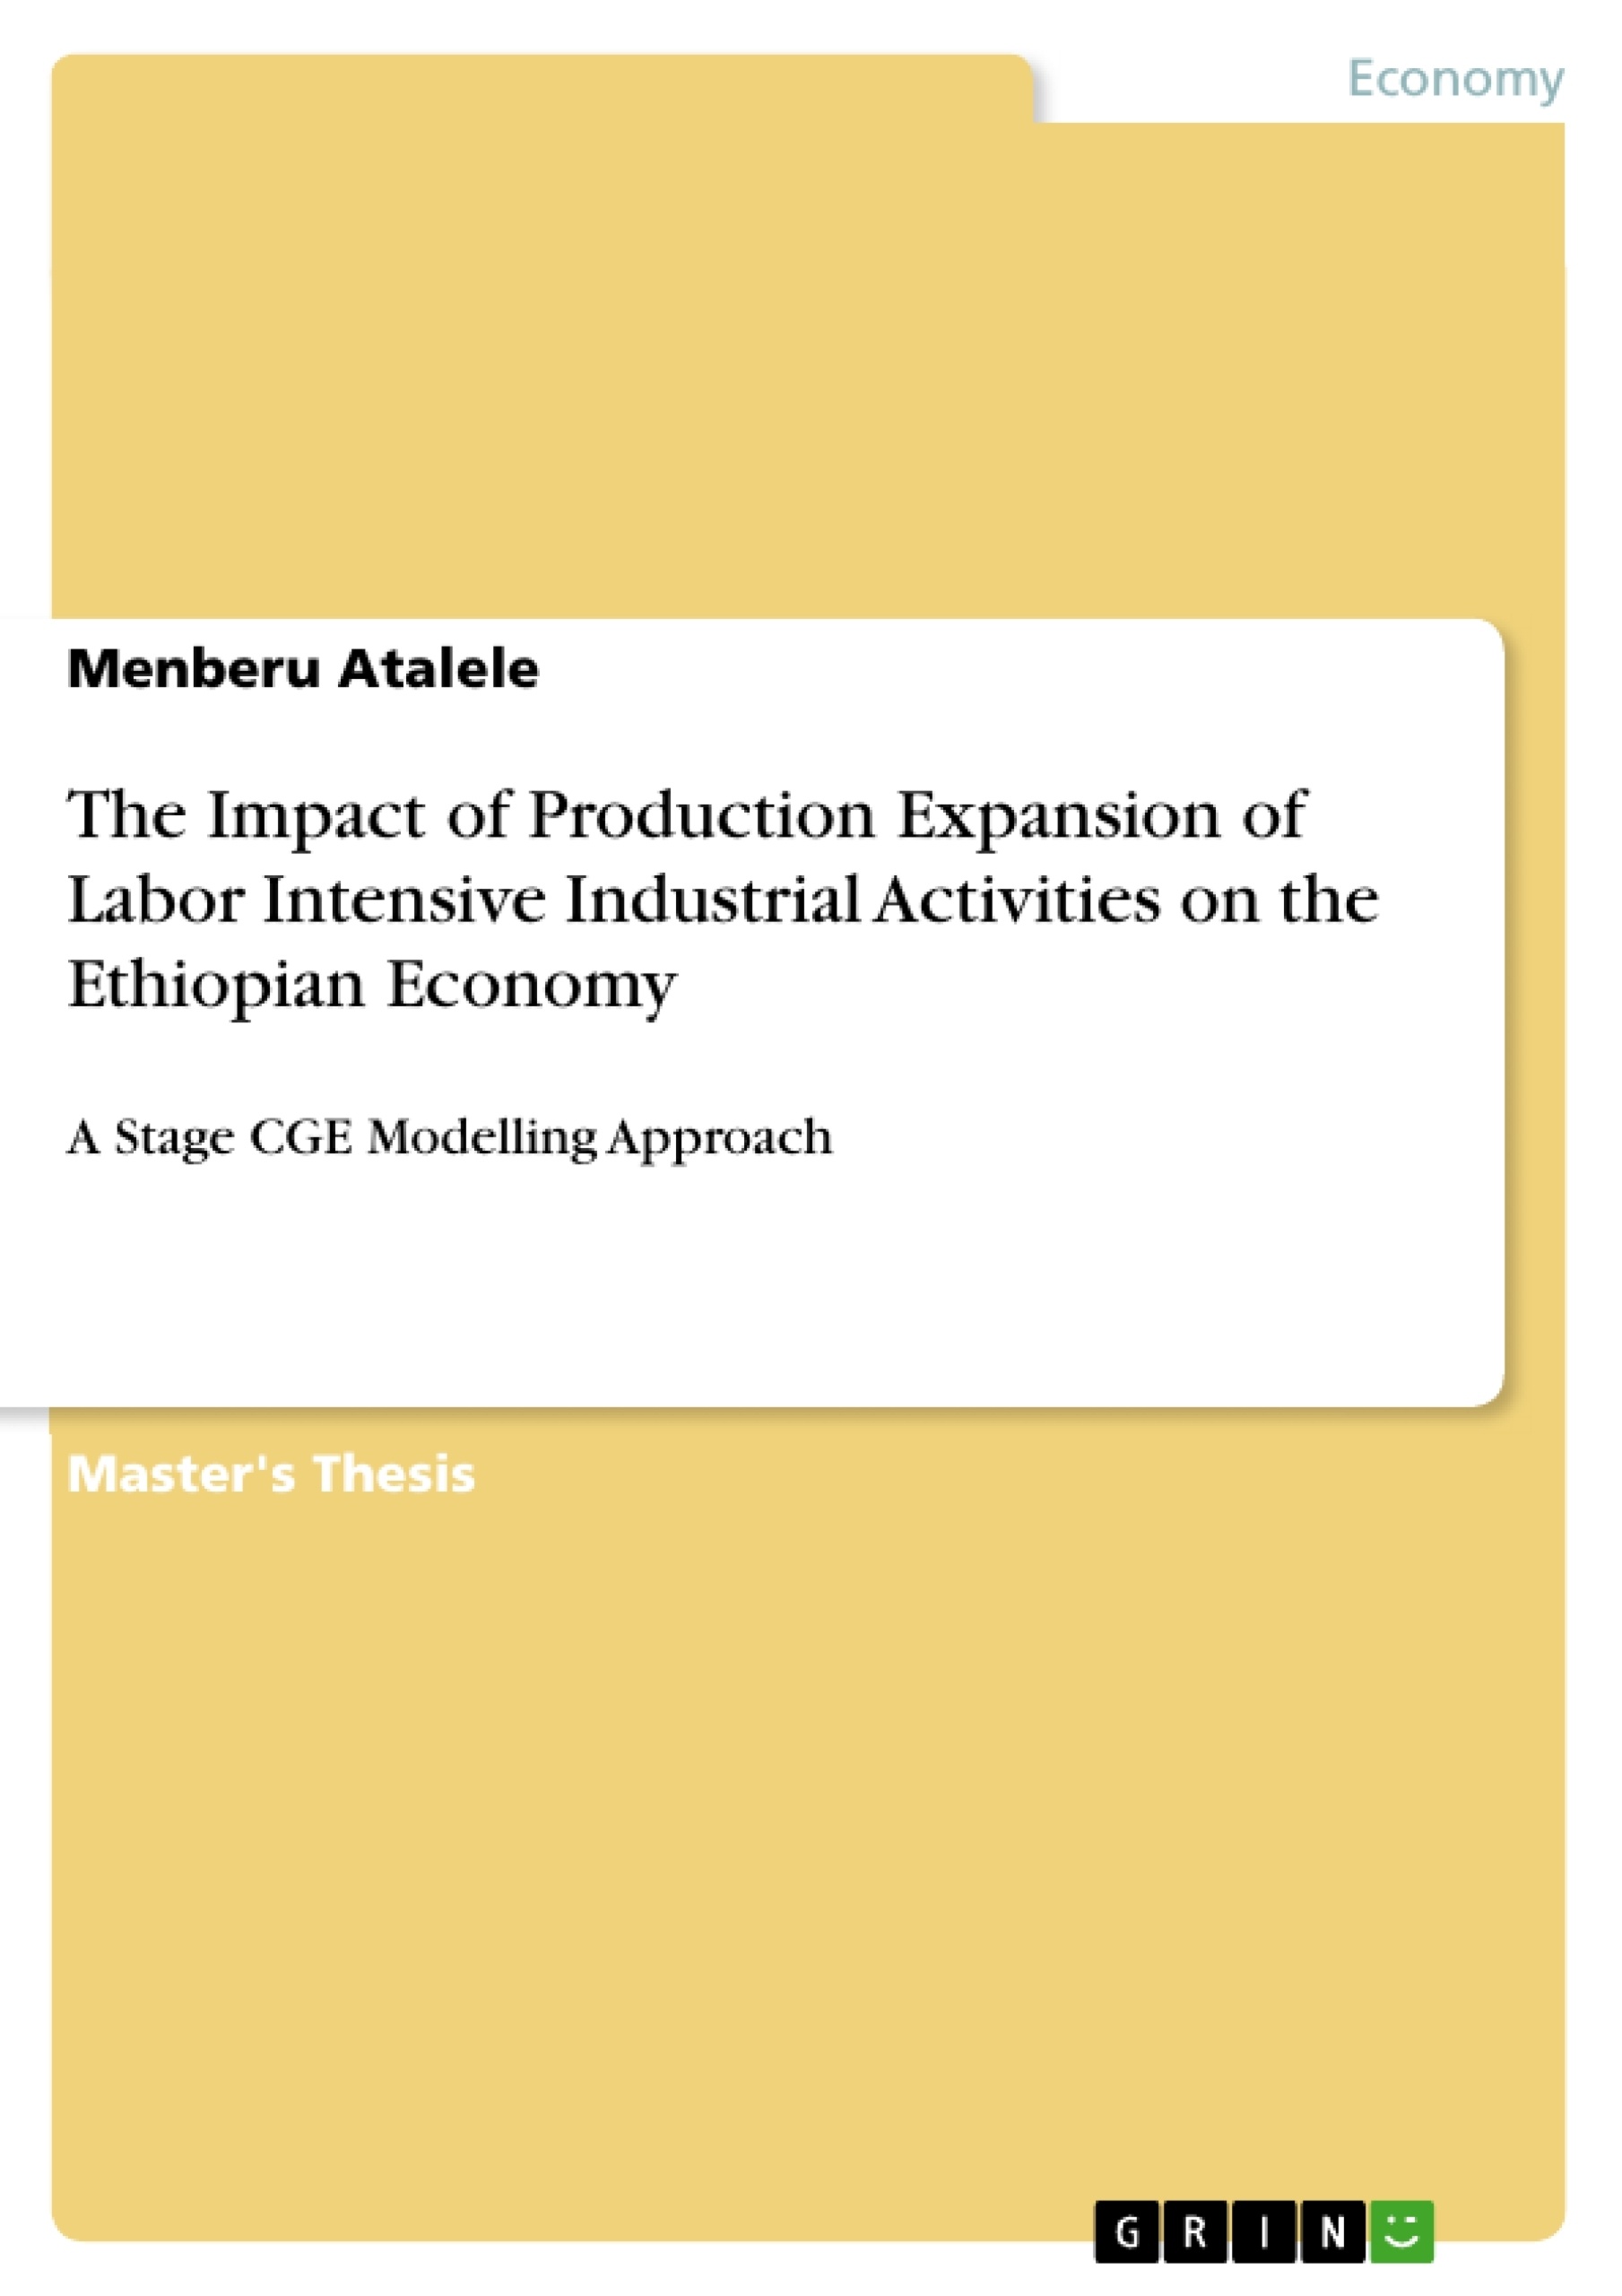 Titre: The Impact of Production Expansion of Labor Intensive Industrial Activities on the Ethiopian Economy